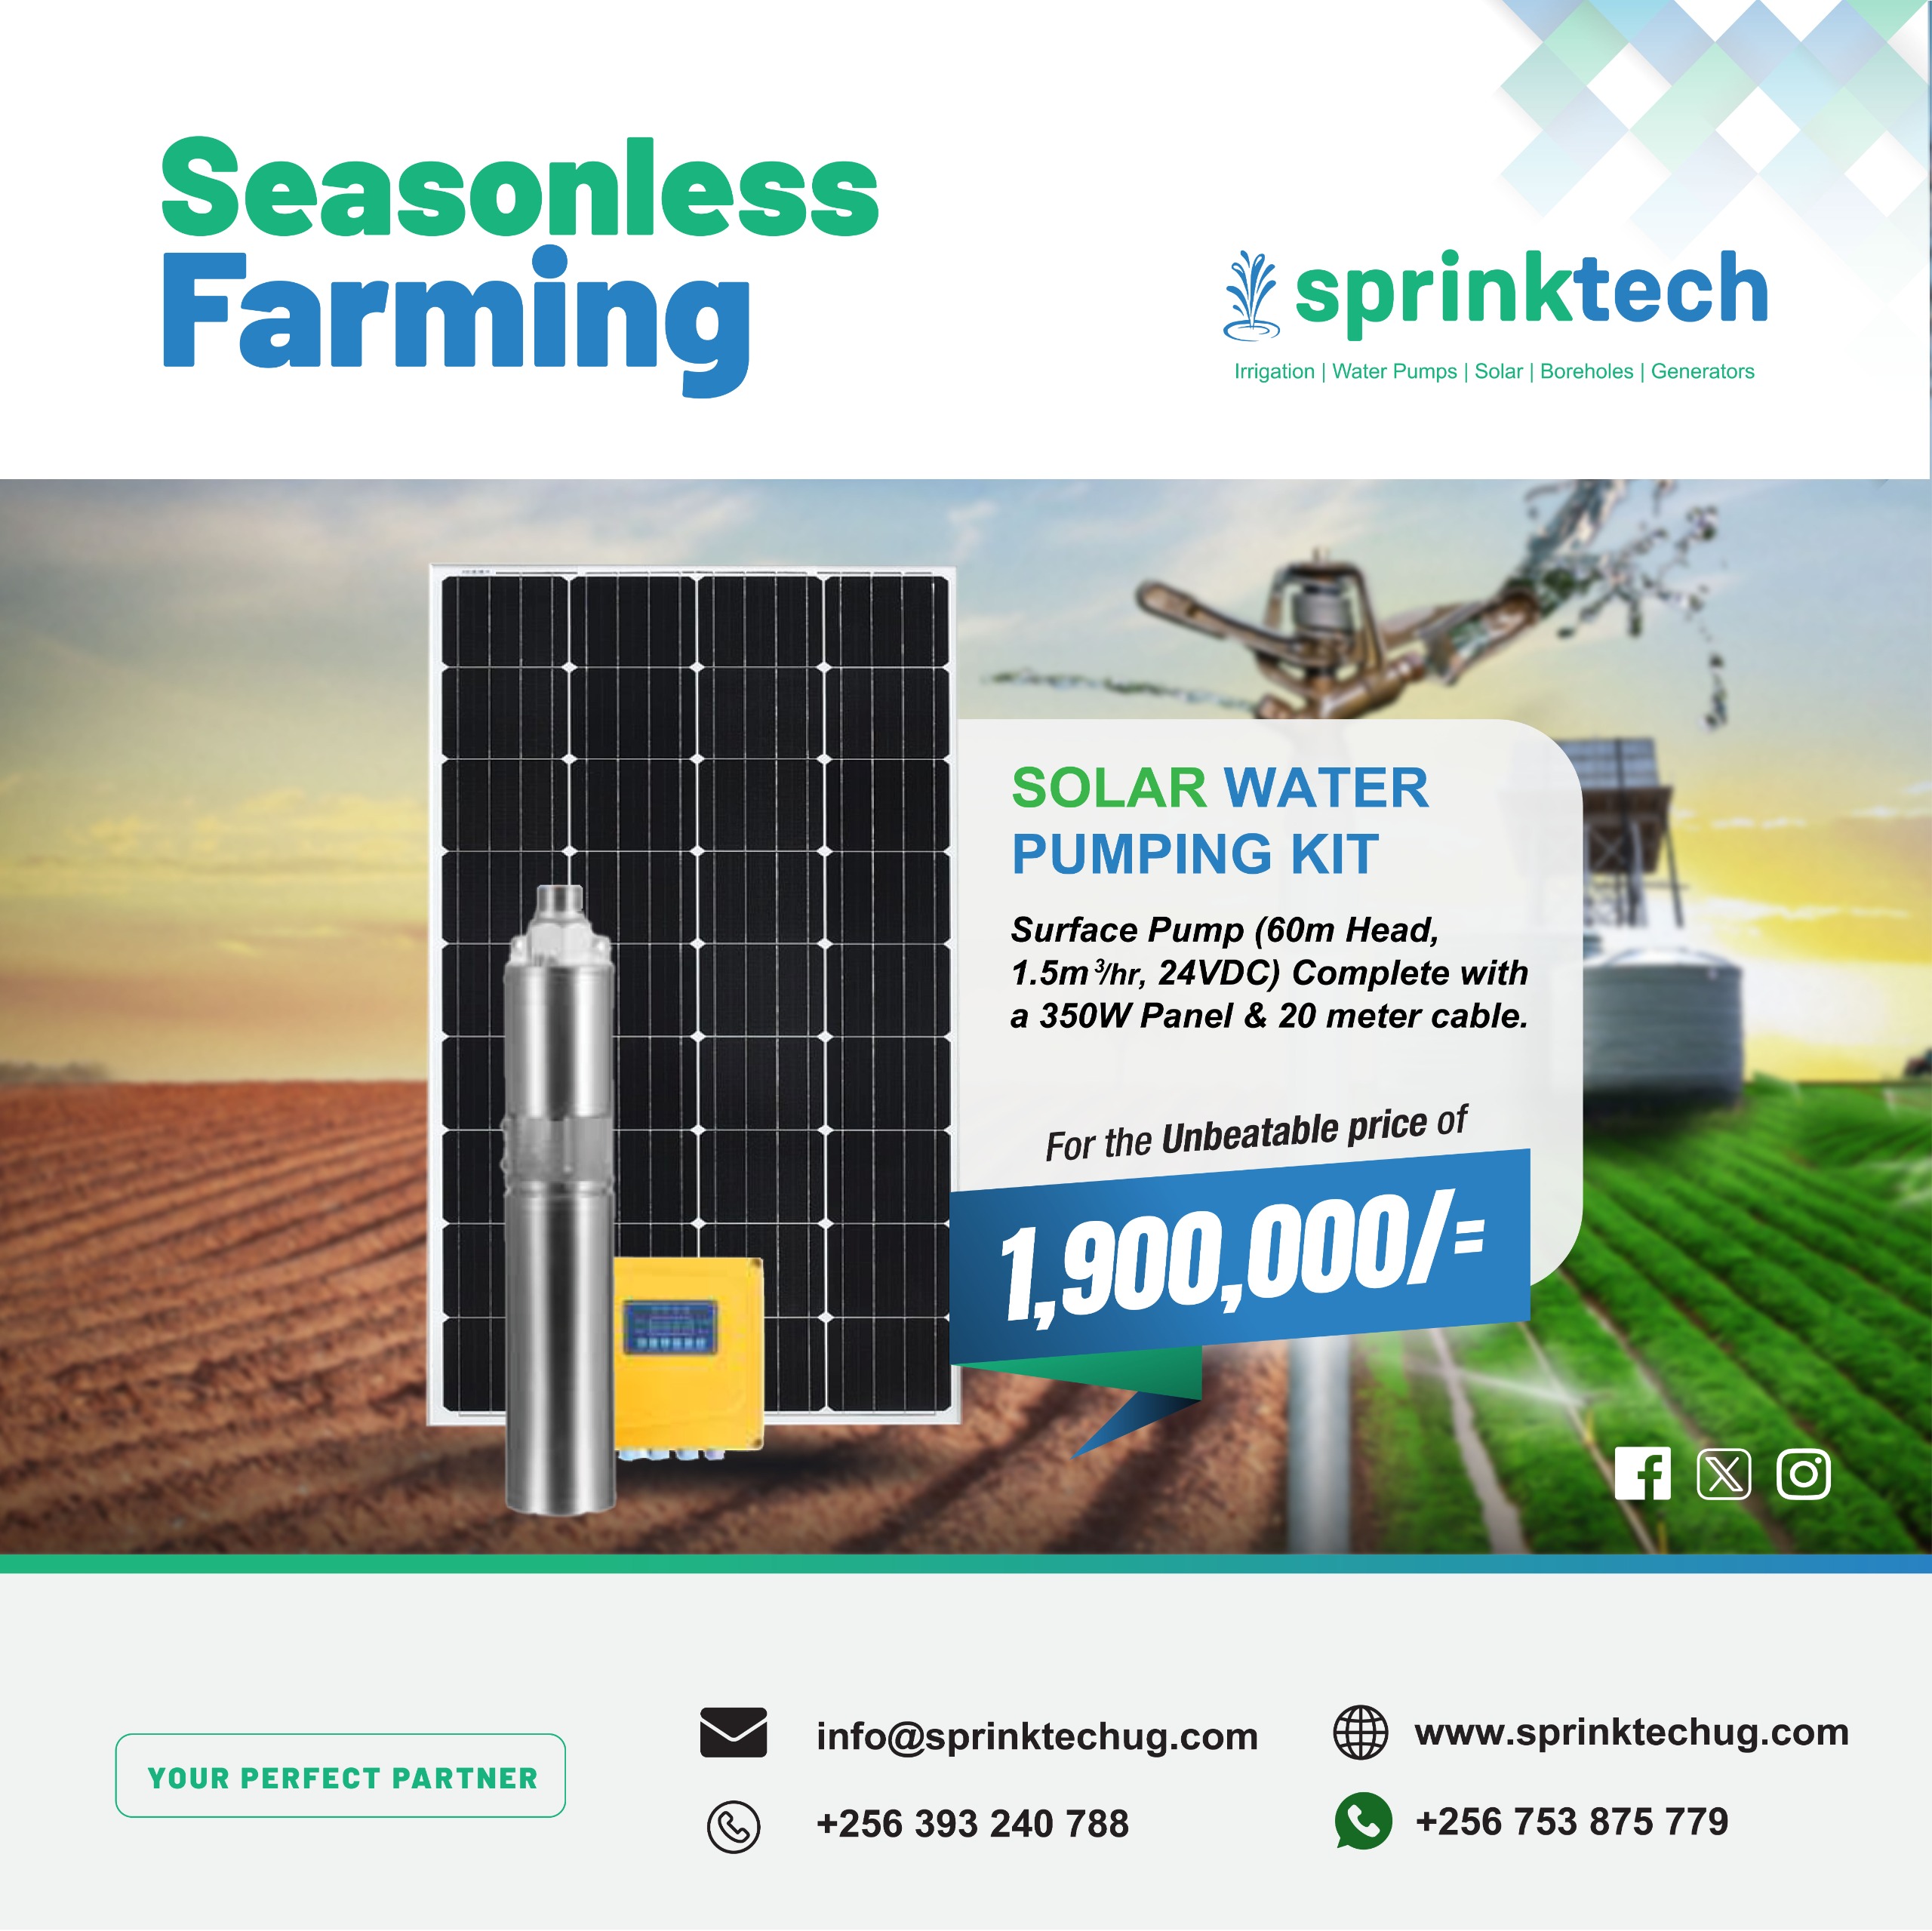 Improving Water Management by Using Sprinktech’s Affordable Solar Water Pumping Kits